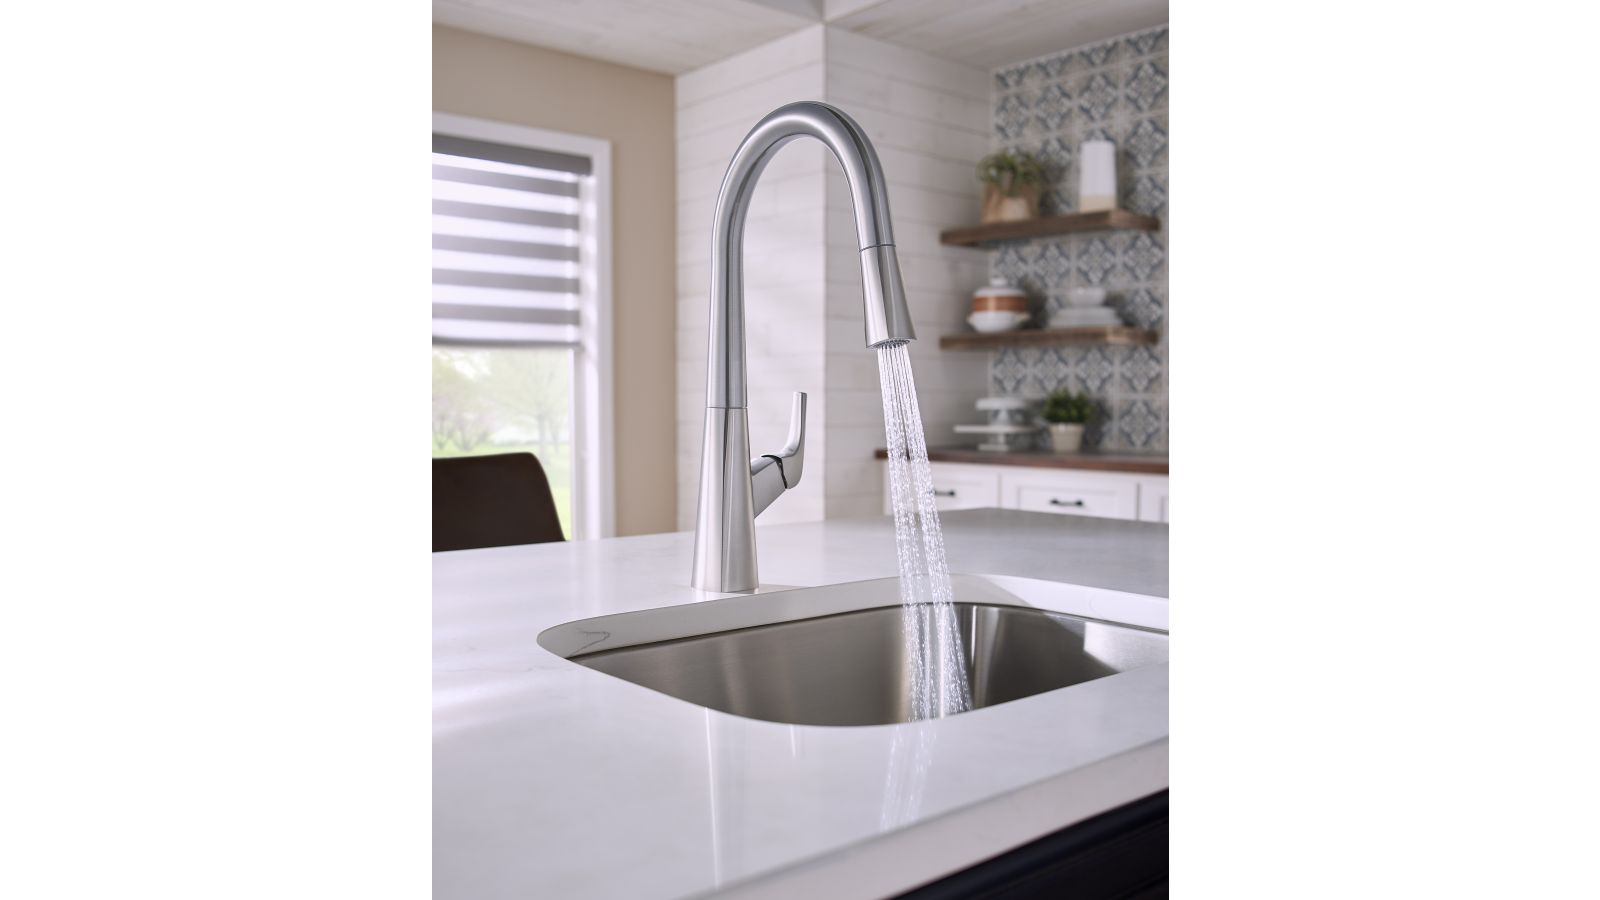 Vaughn™ Single Handle Pull-Down Kitchen Faucet